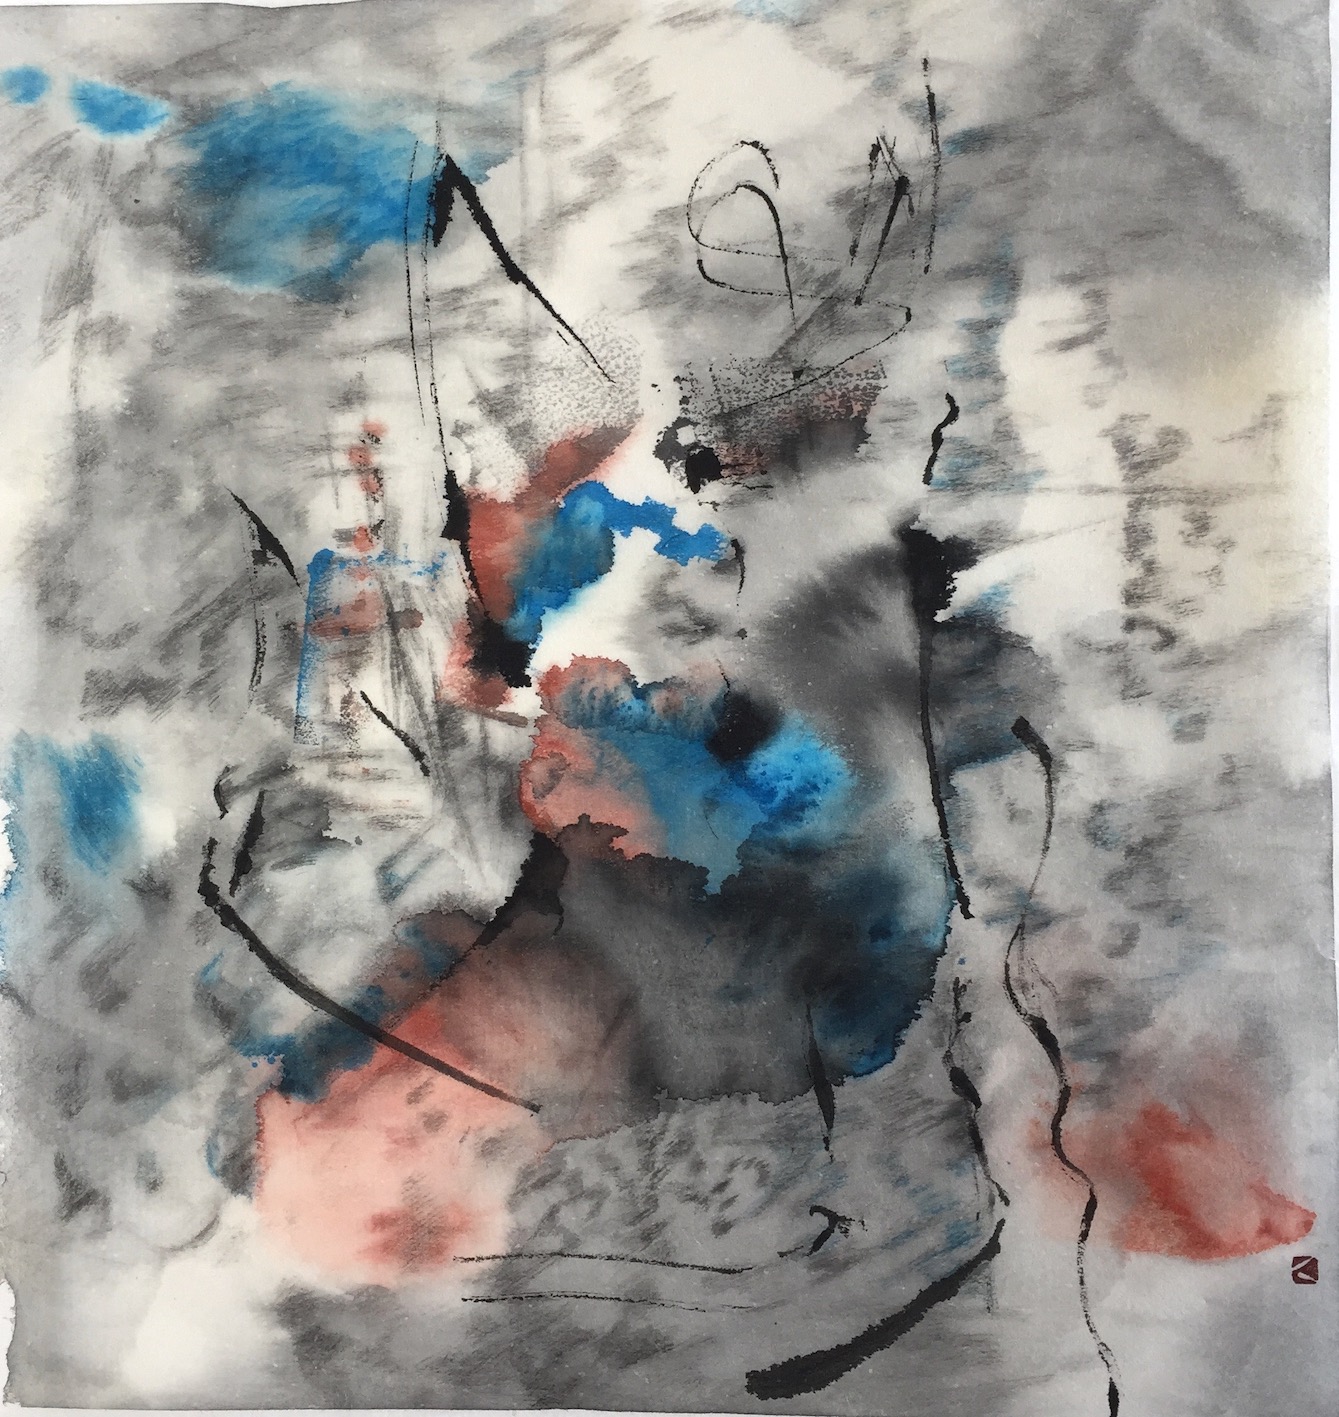 Clouds Dancing 1 24 X 25 cms Sumi ink, acrylic, 踊る雲 1 墨、アクリル　　2020